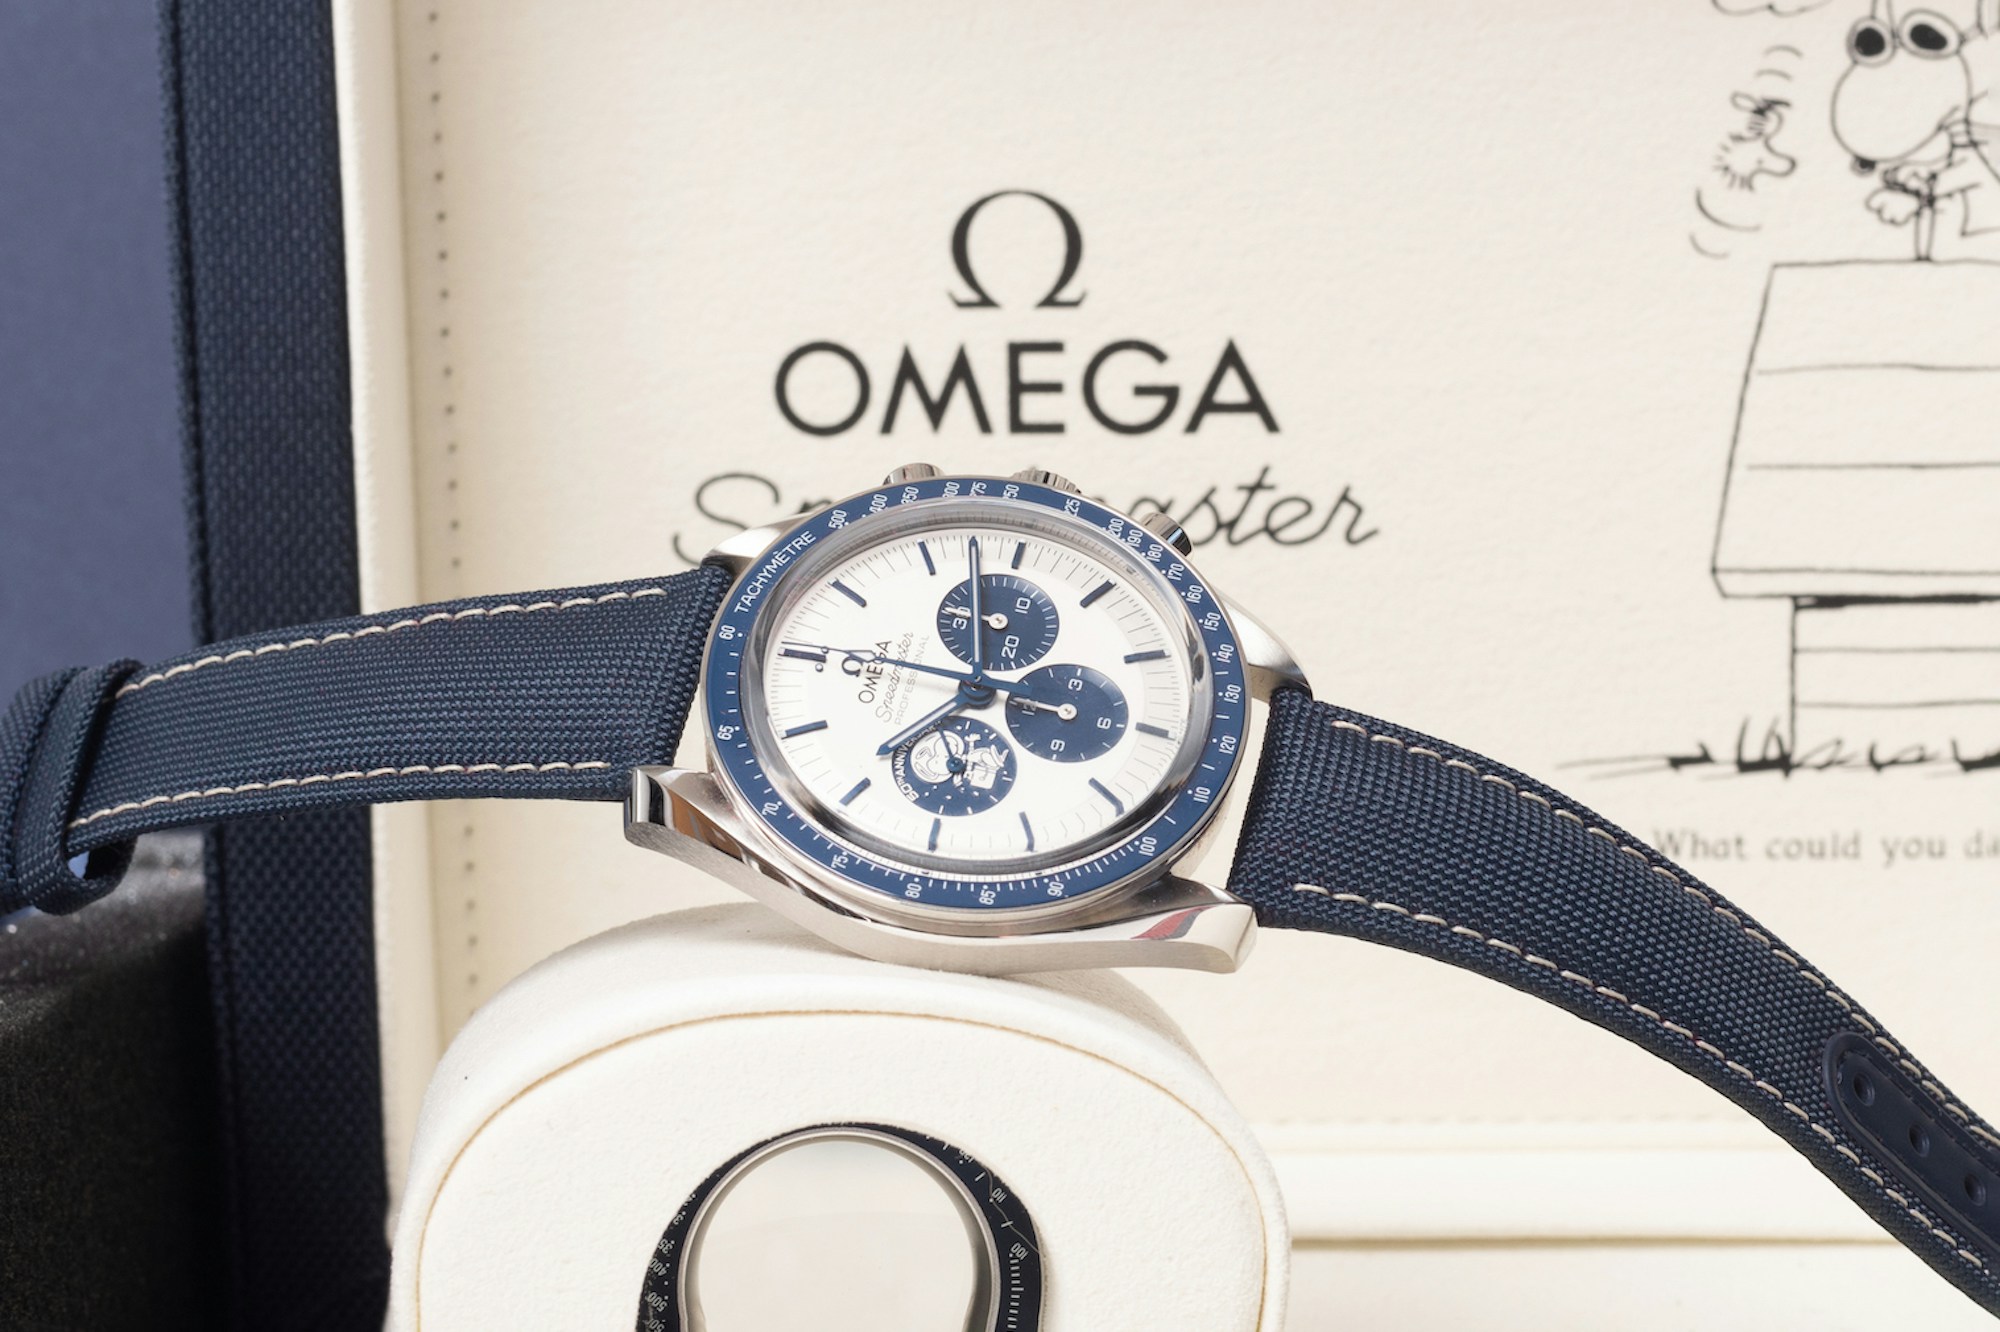 How Snoopy Ended Up on an Omega Speedmaster Dial